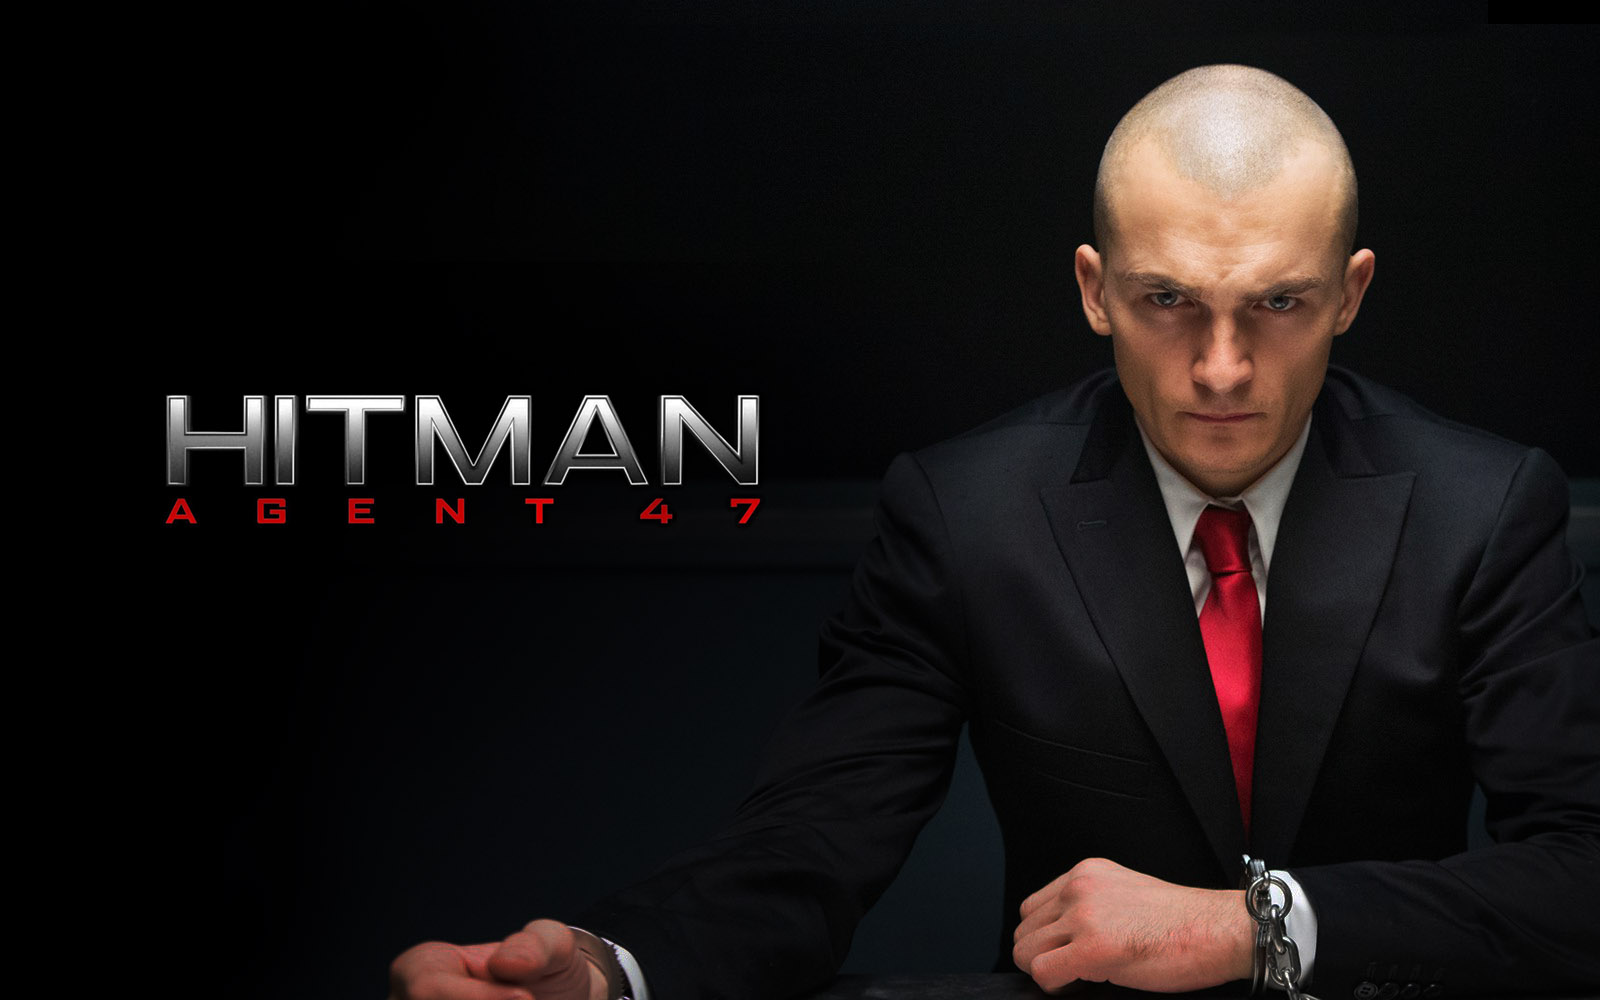 Hitman Agent 47 Wallpapers High Quality | Download Free